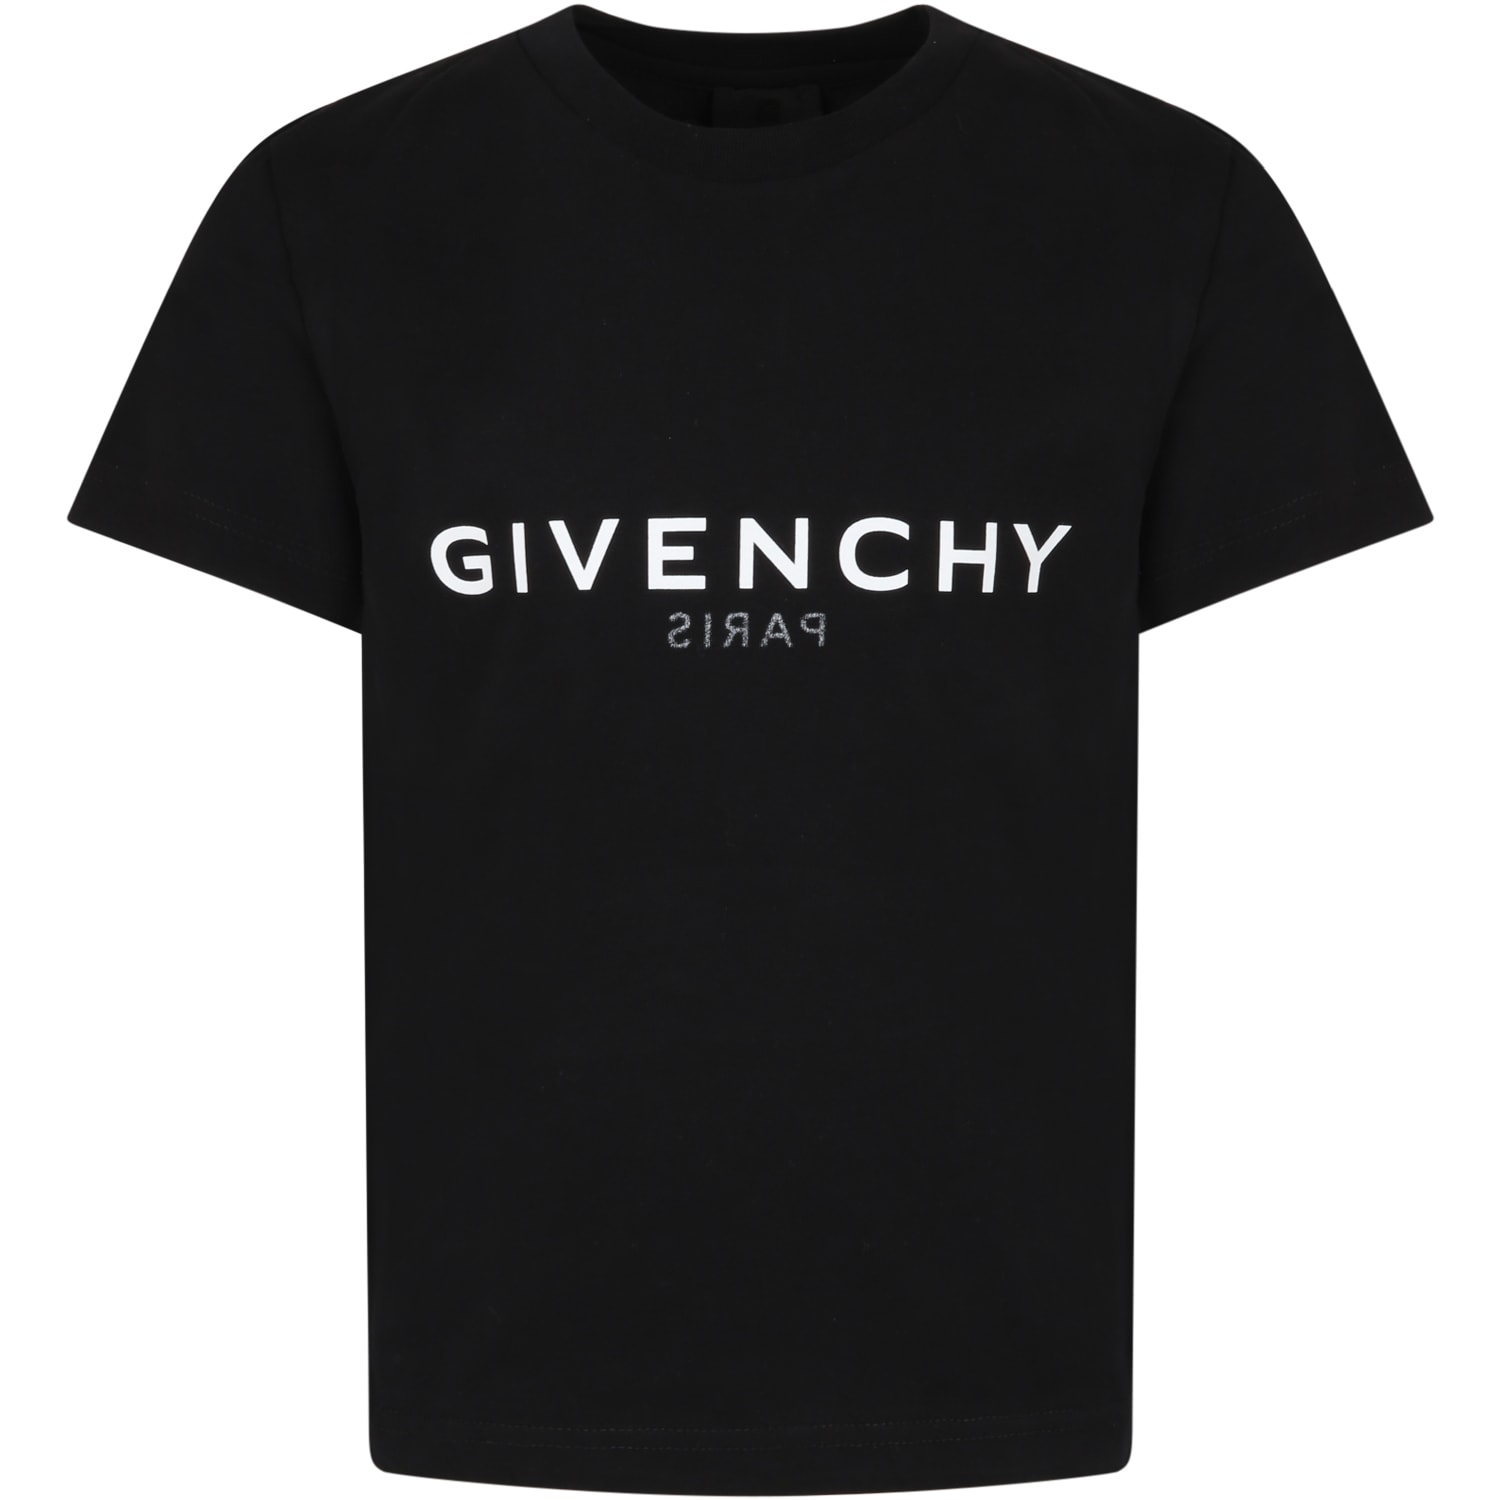 Givenchy Black T-shirt For Kids With White Logo